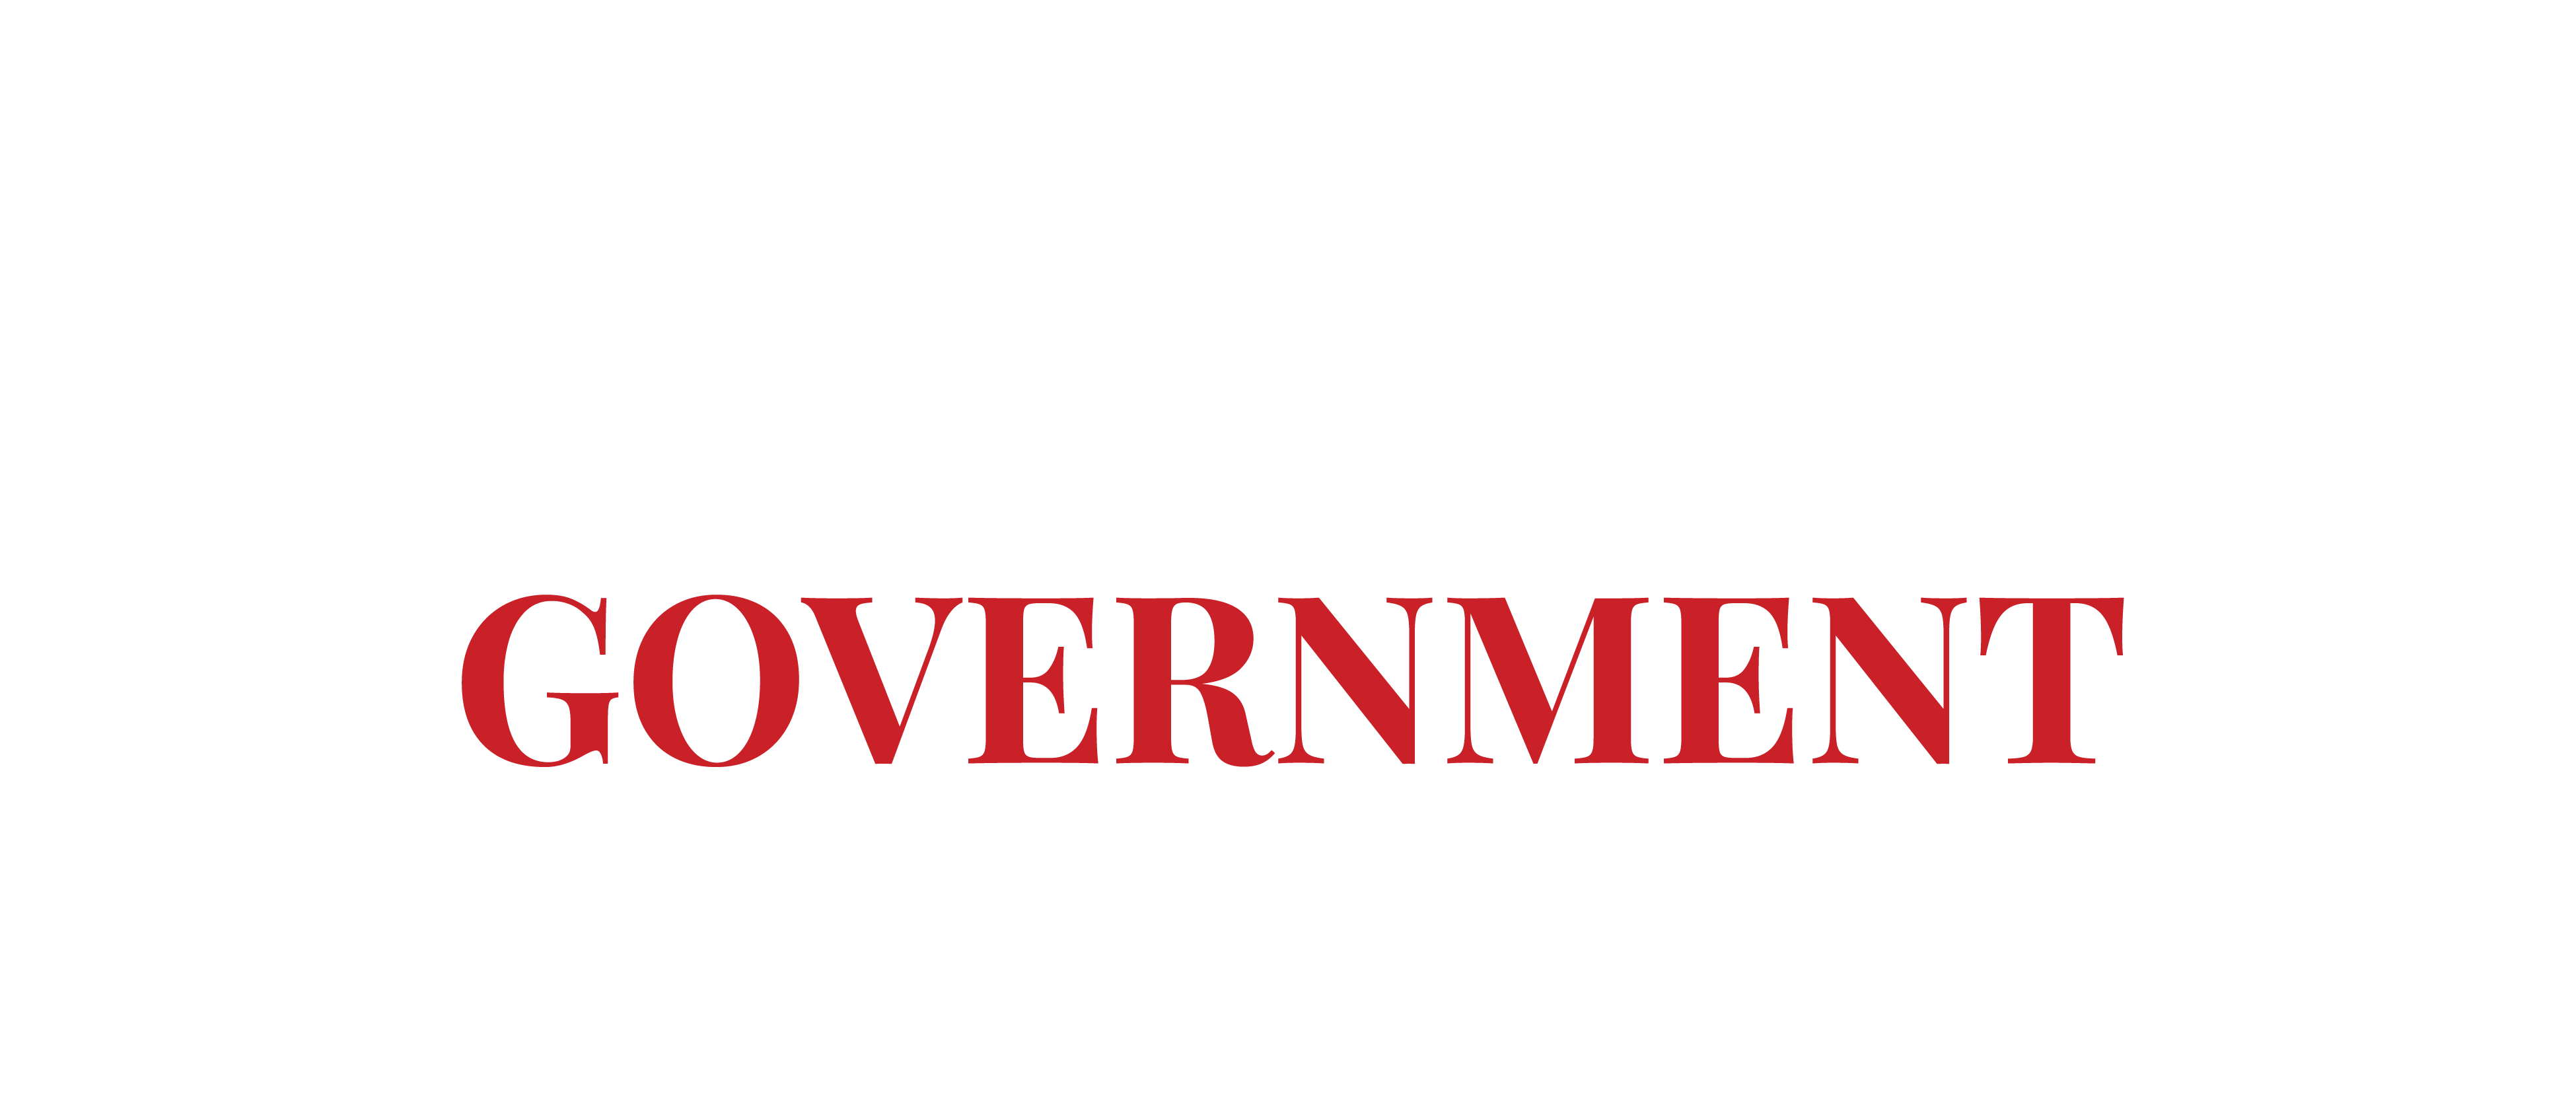 God Over Government